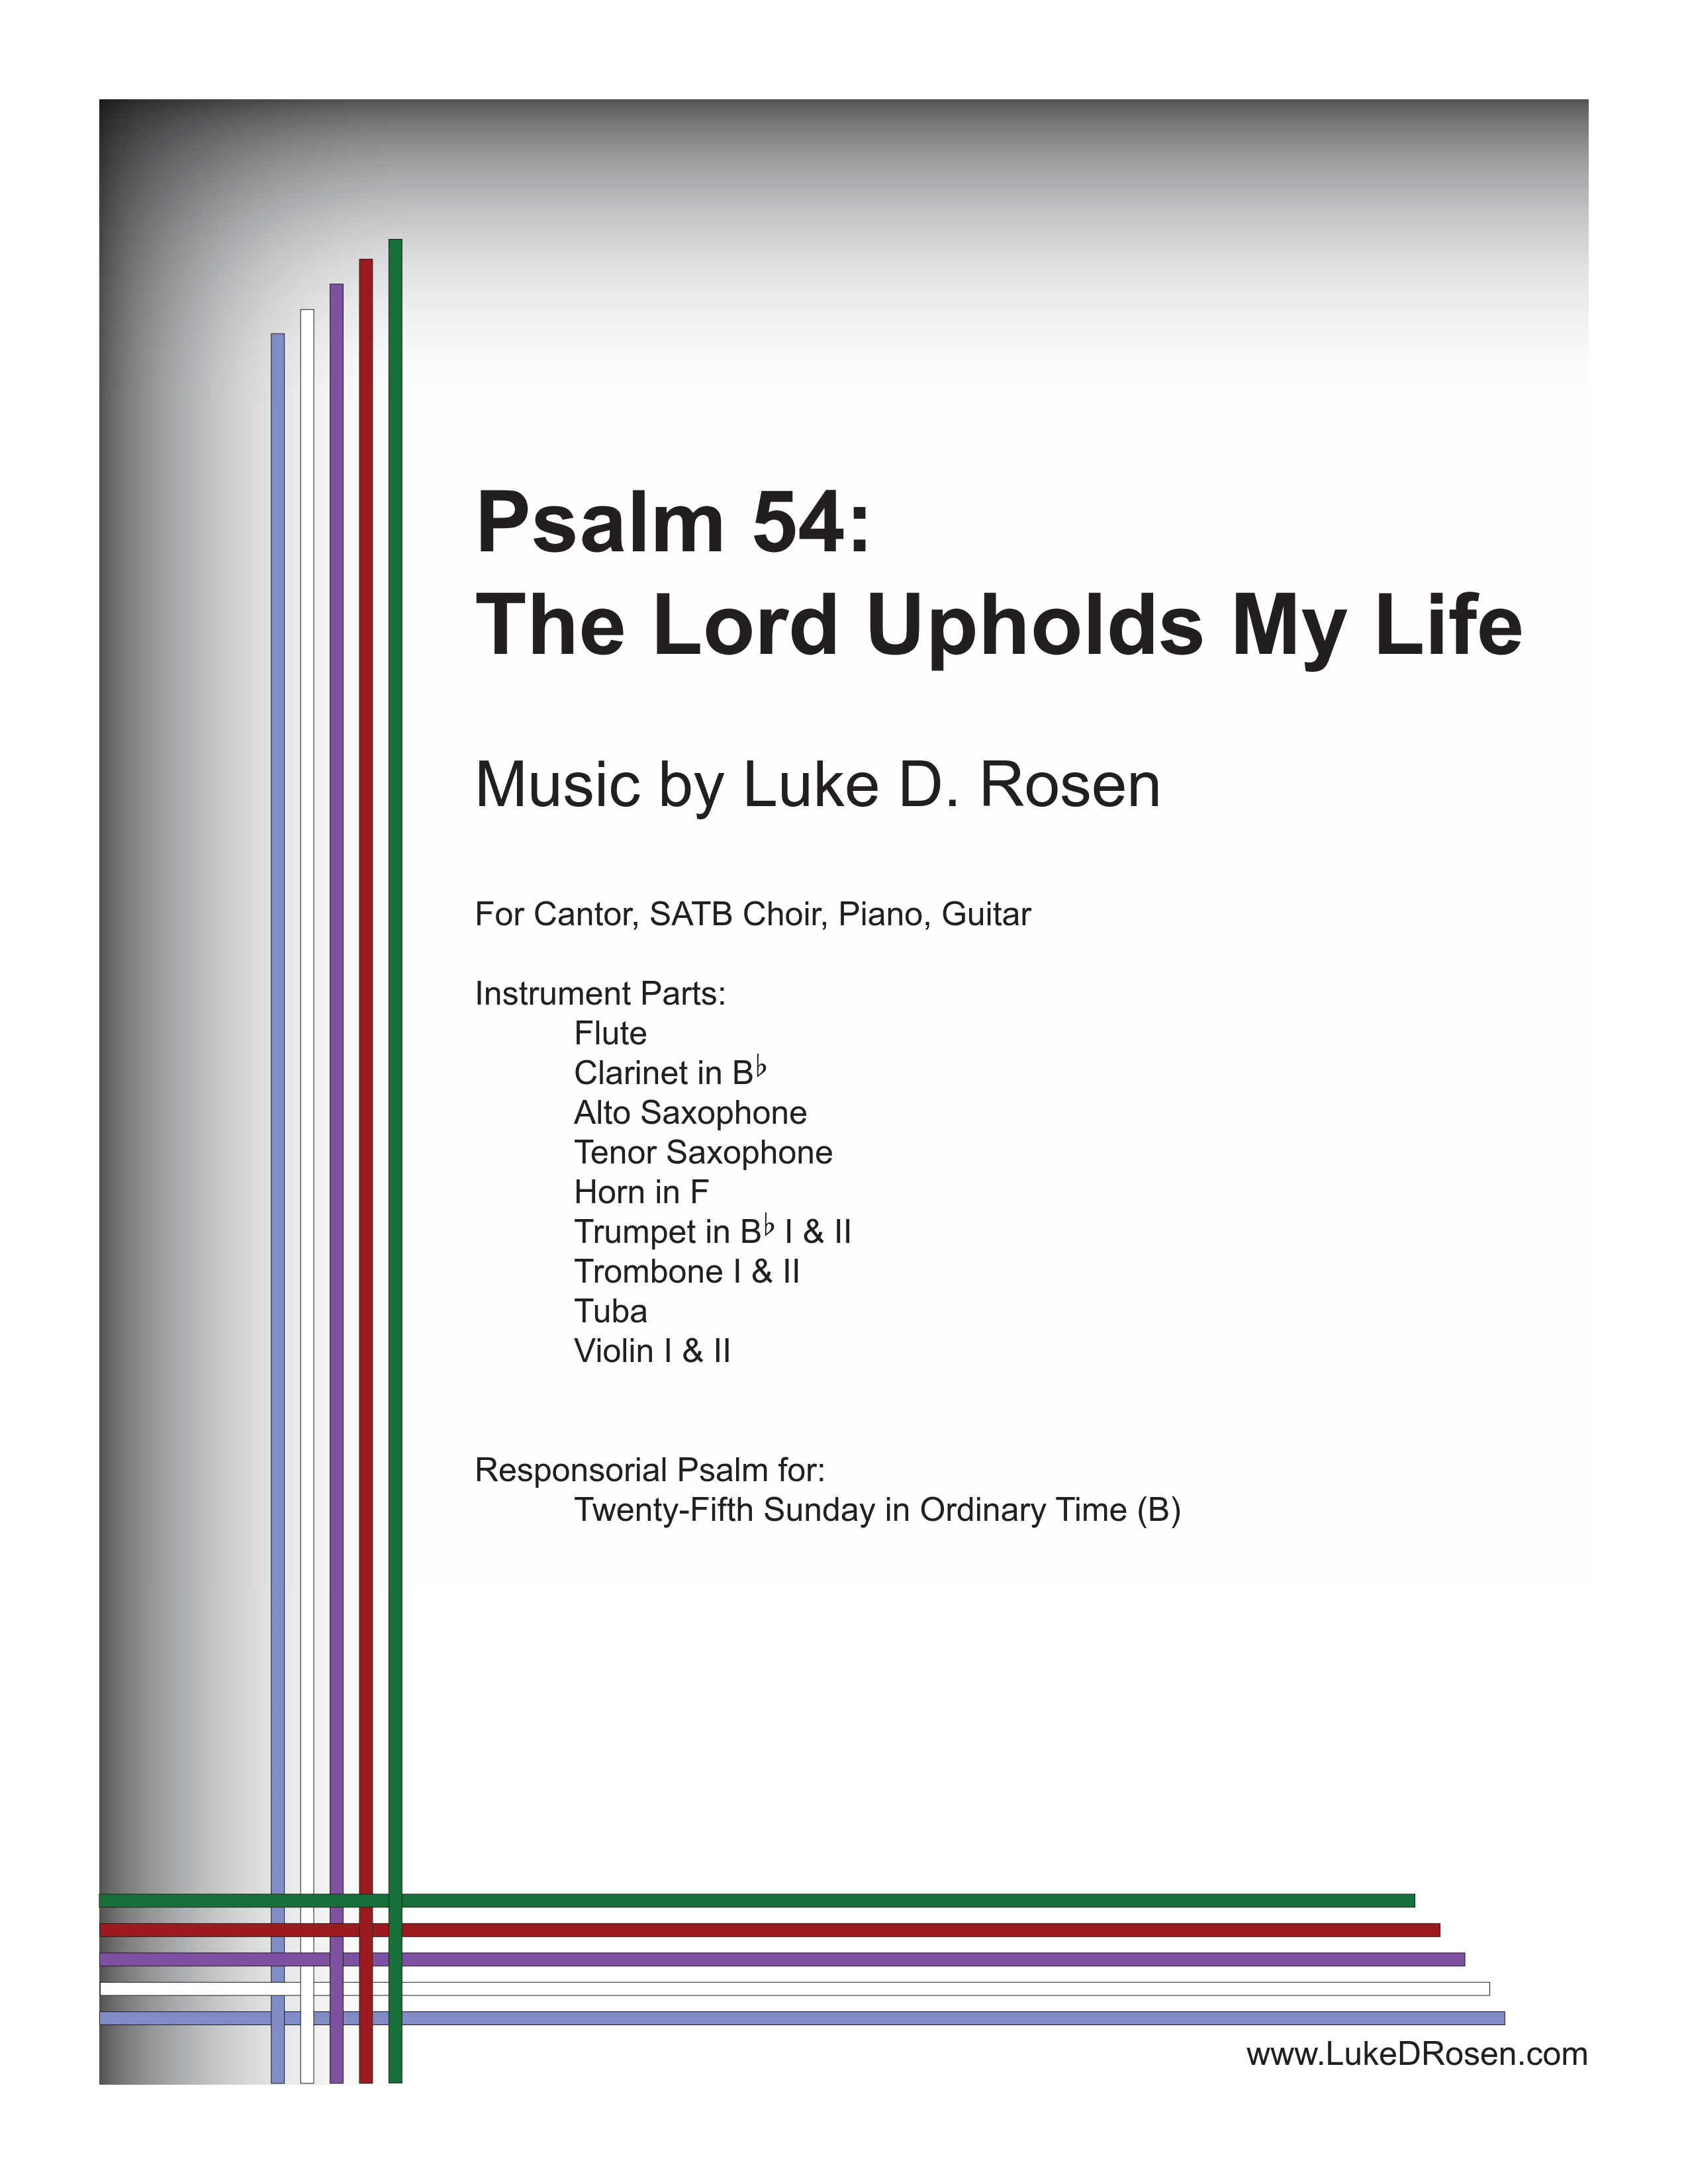 Psalm 54 – The Lord Upholds My Life (Rosen)